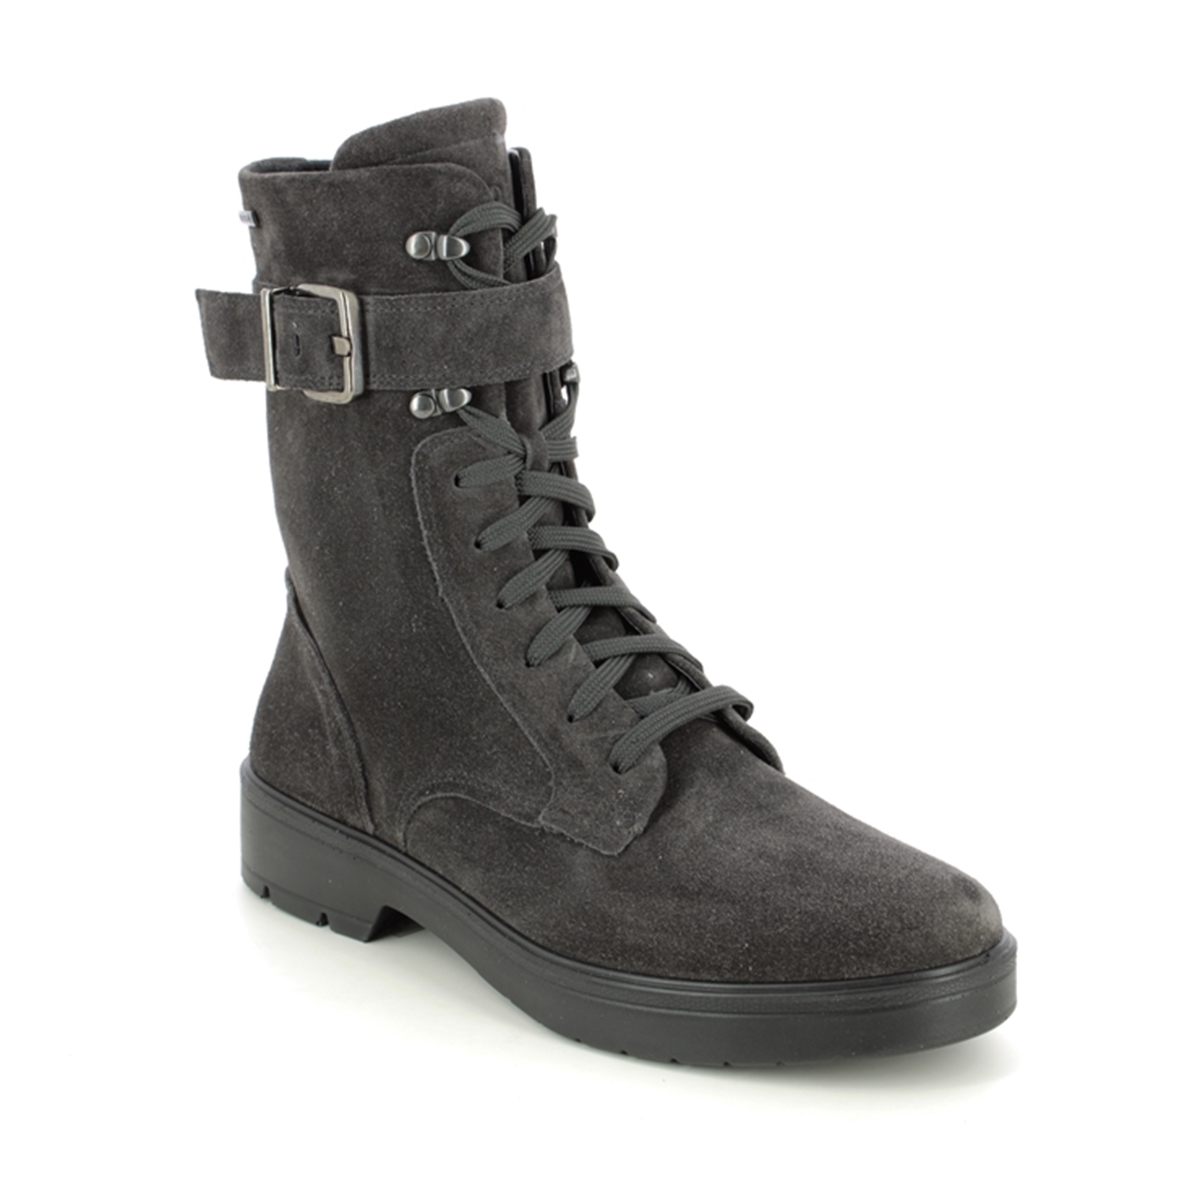 Legero Mystic Lace Gtx Grey Womens Lace Up Boots 2000193-2300 in a Plain Leather in Size 4.5